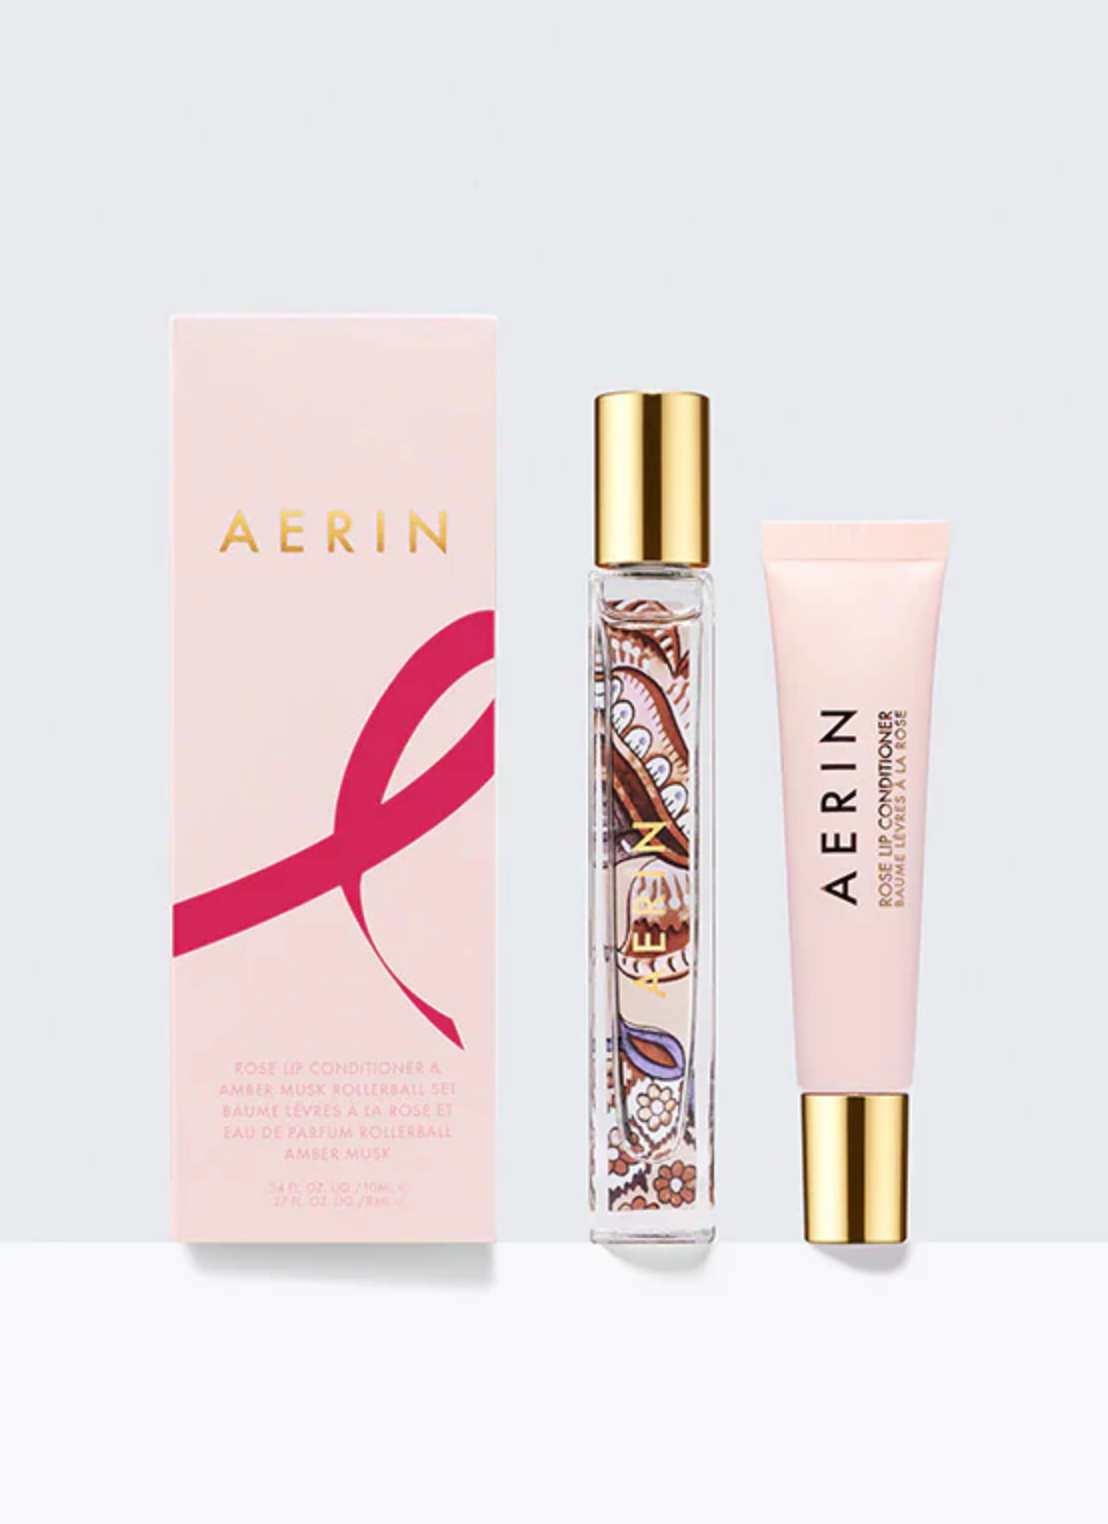 Shop These 9 Products That Help Support Breast Cancer Research | Essence